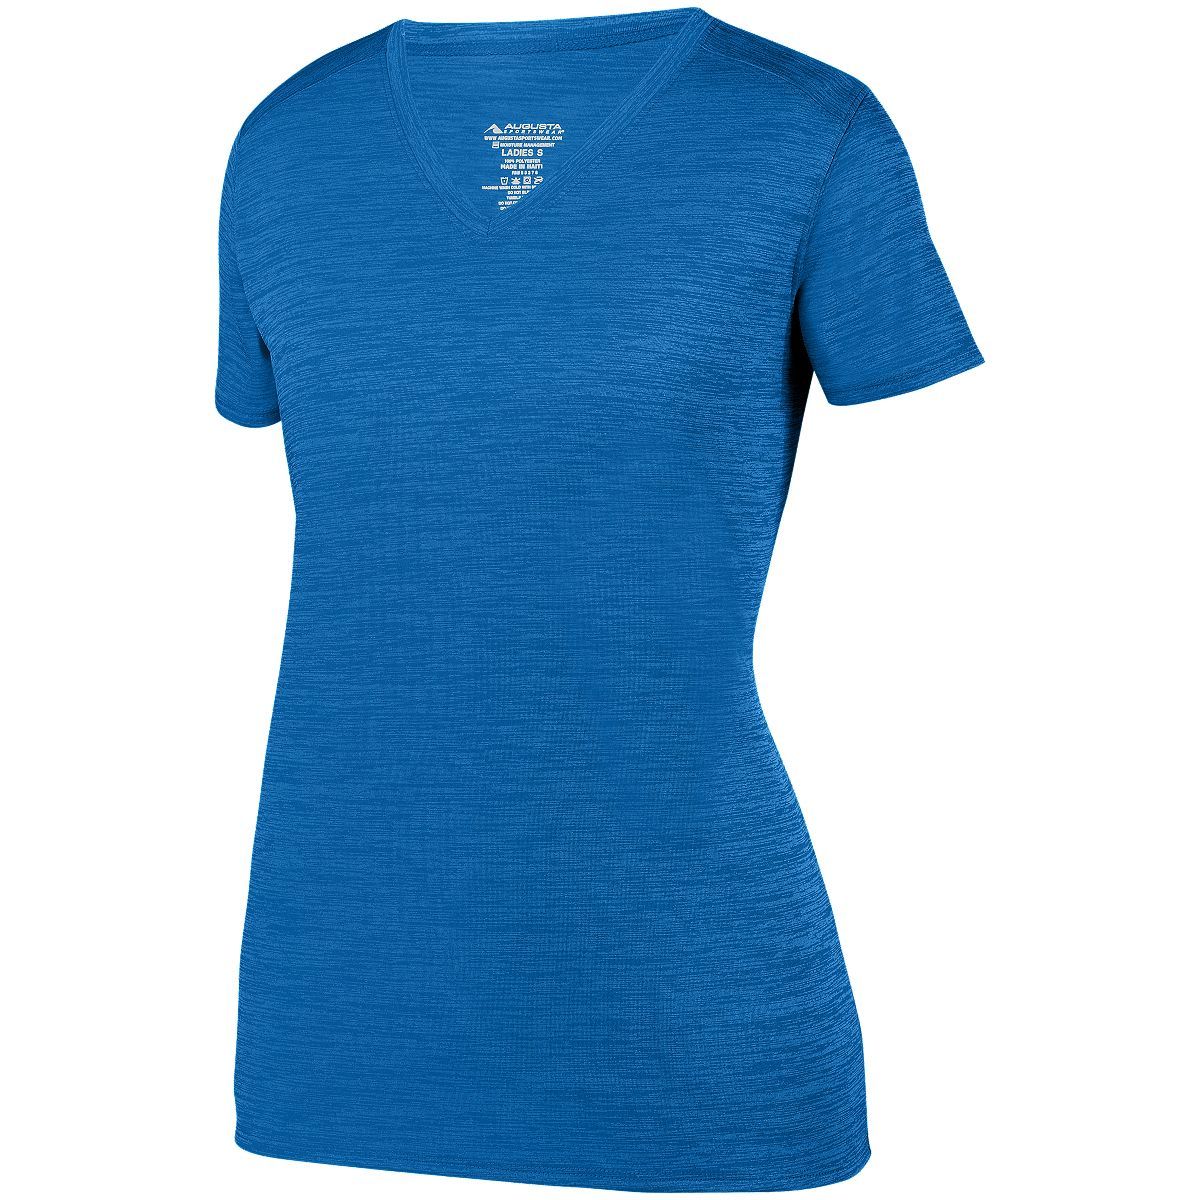 Augusta Sportswear Ladies Shadow Tonal Heather Training Tee in Royal  -Part of the Ladies, Ladies-Tee-Shirt, T-Shirts, Augusta-Products, Shirts, Tonal-Fleece-Collection product lines at KanaleyCreations.com